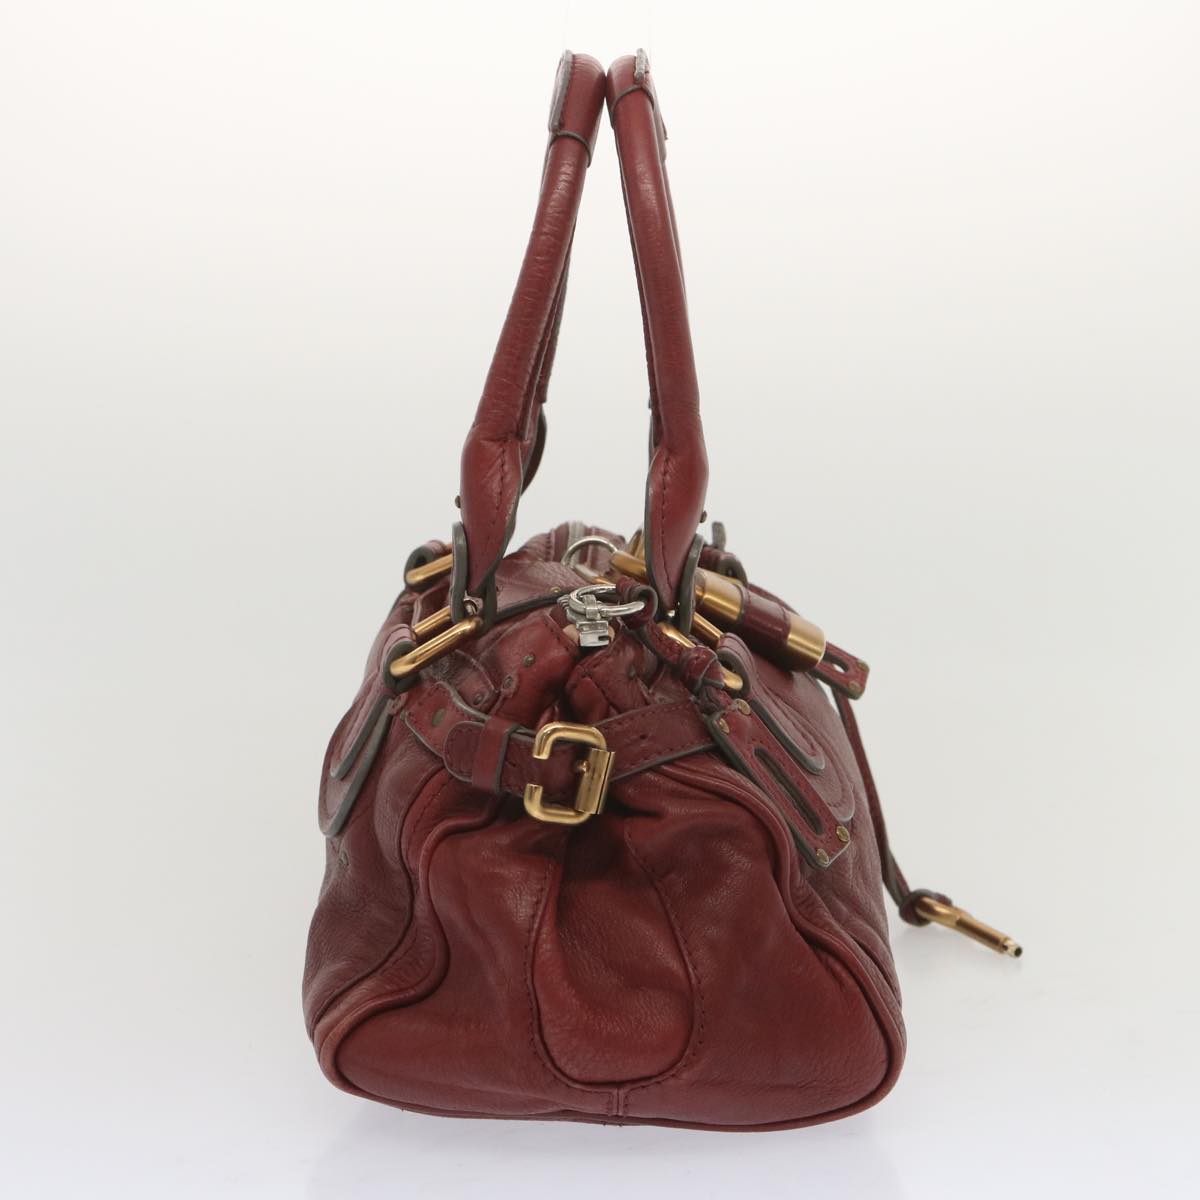 Chloe Hand Bag Leather Red 03 05 53 Auth 61485